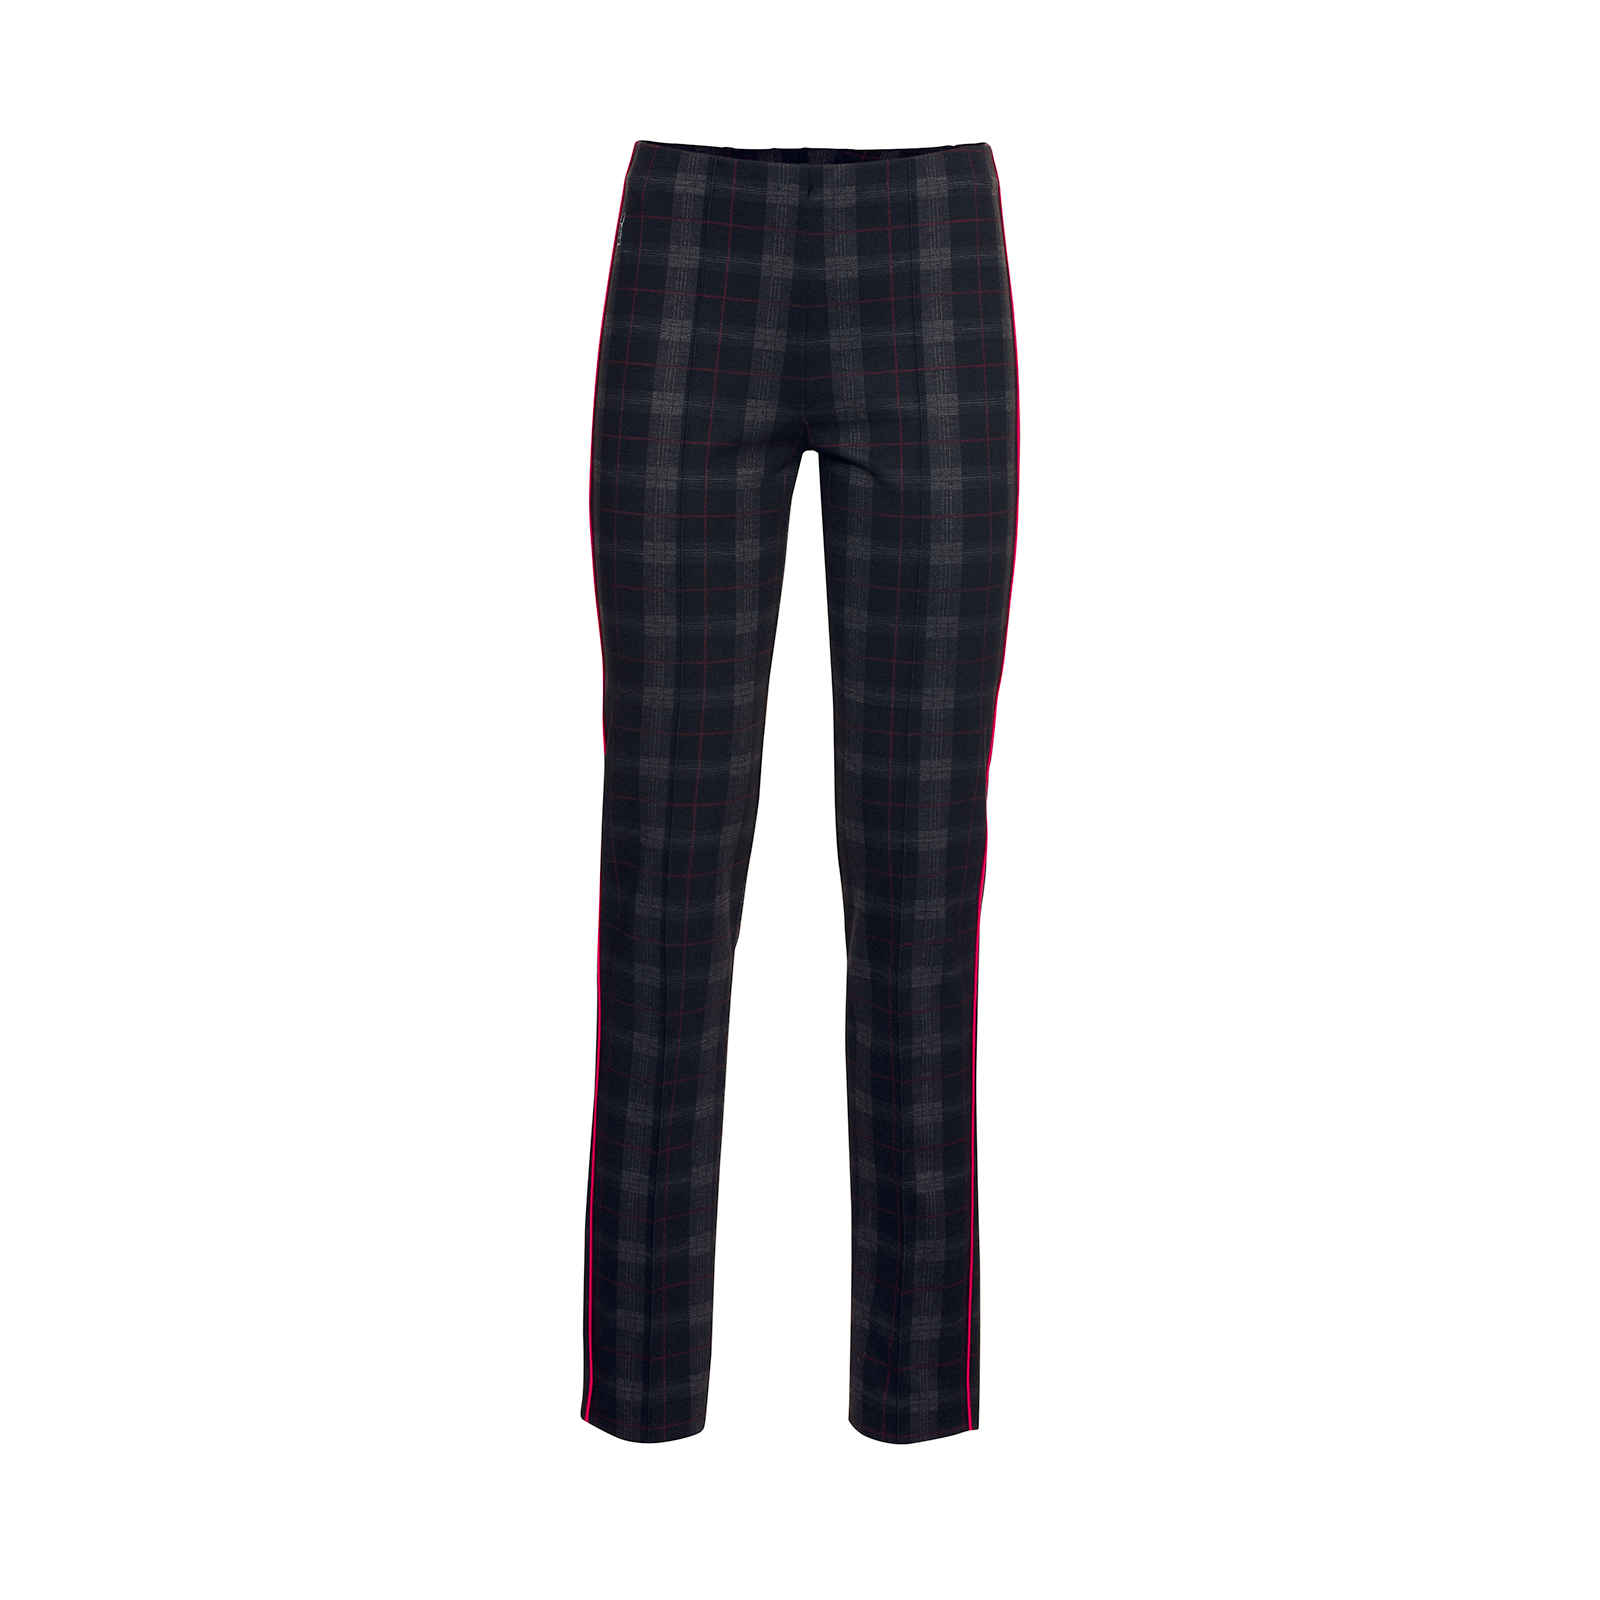 Extra stretchy ladies golf trousers 